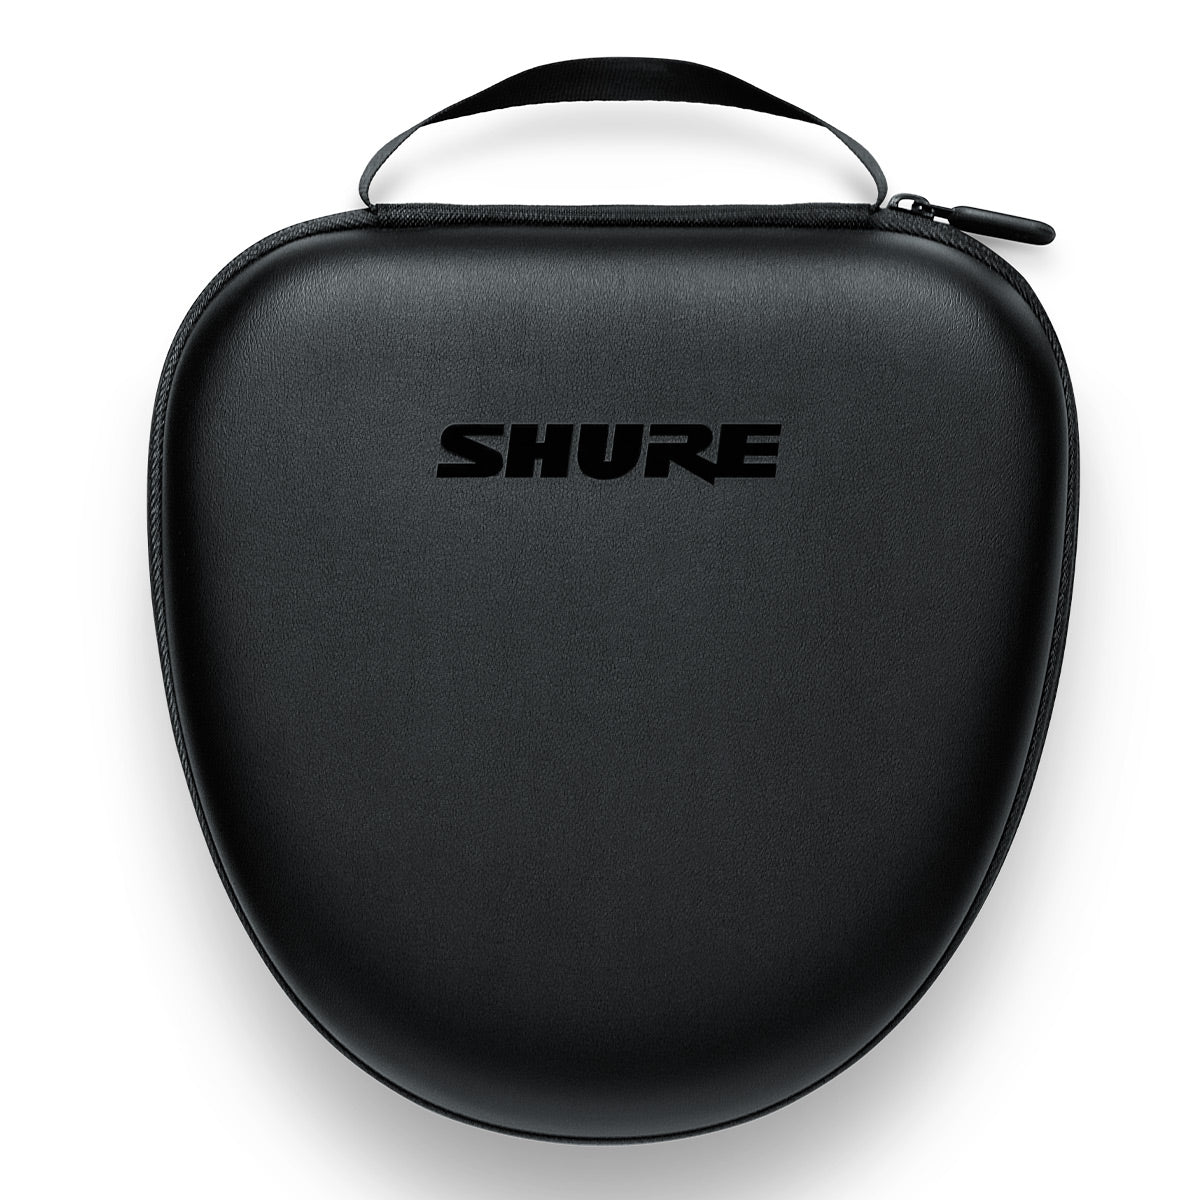 Shure AONIC 50 Gen 2 Bluetooth Wireless Noise Cancelling 